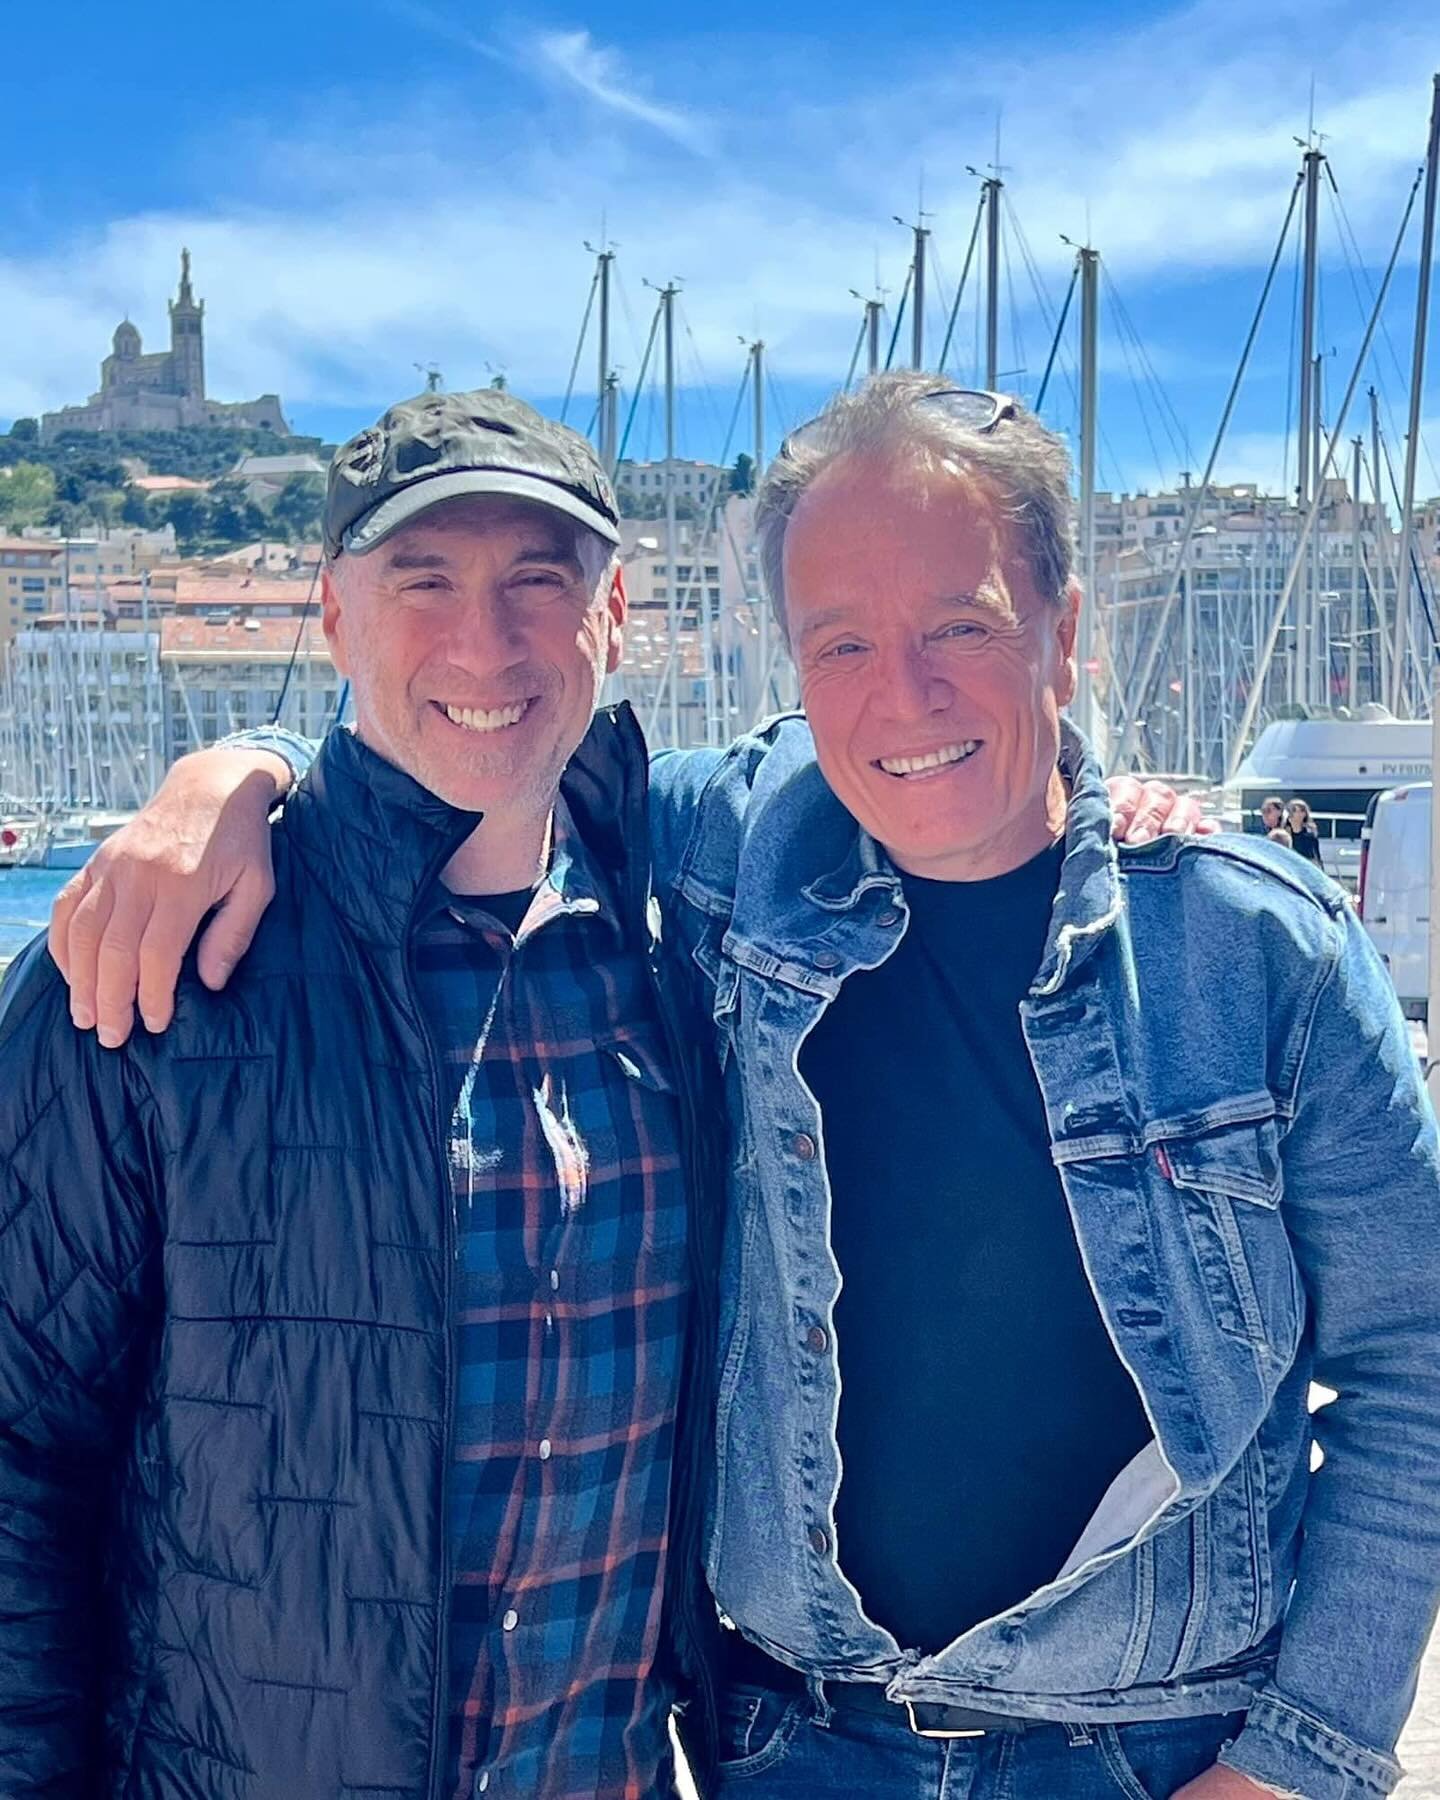 Last week in Marseille getting together with my dear, longtime friend Jimmy Daniel @jdanieldrums. It&rsquo;s been a long time since we&rsquo;ve seen each other and we picked up like we saw each other yesterday. ❤️ #friends #musicians #marseille #tbt